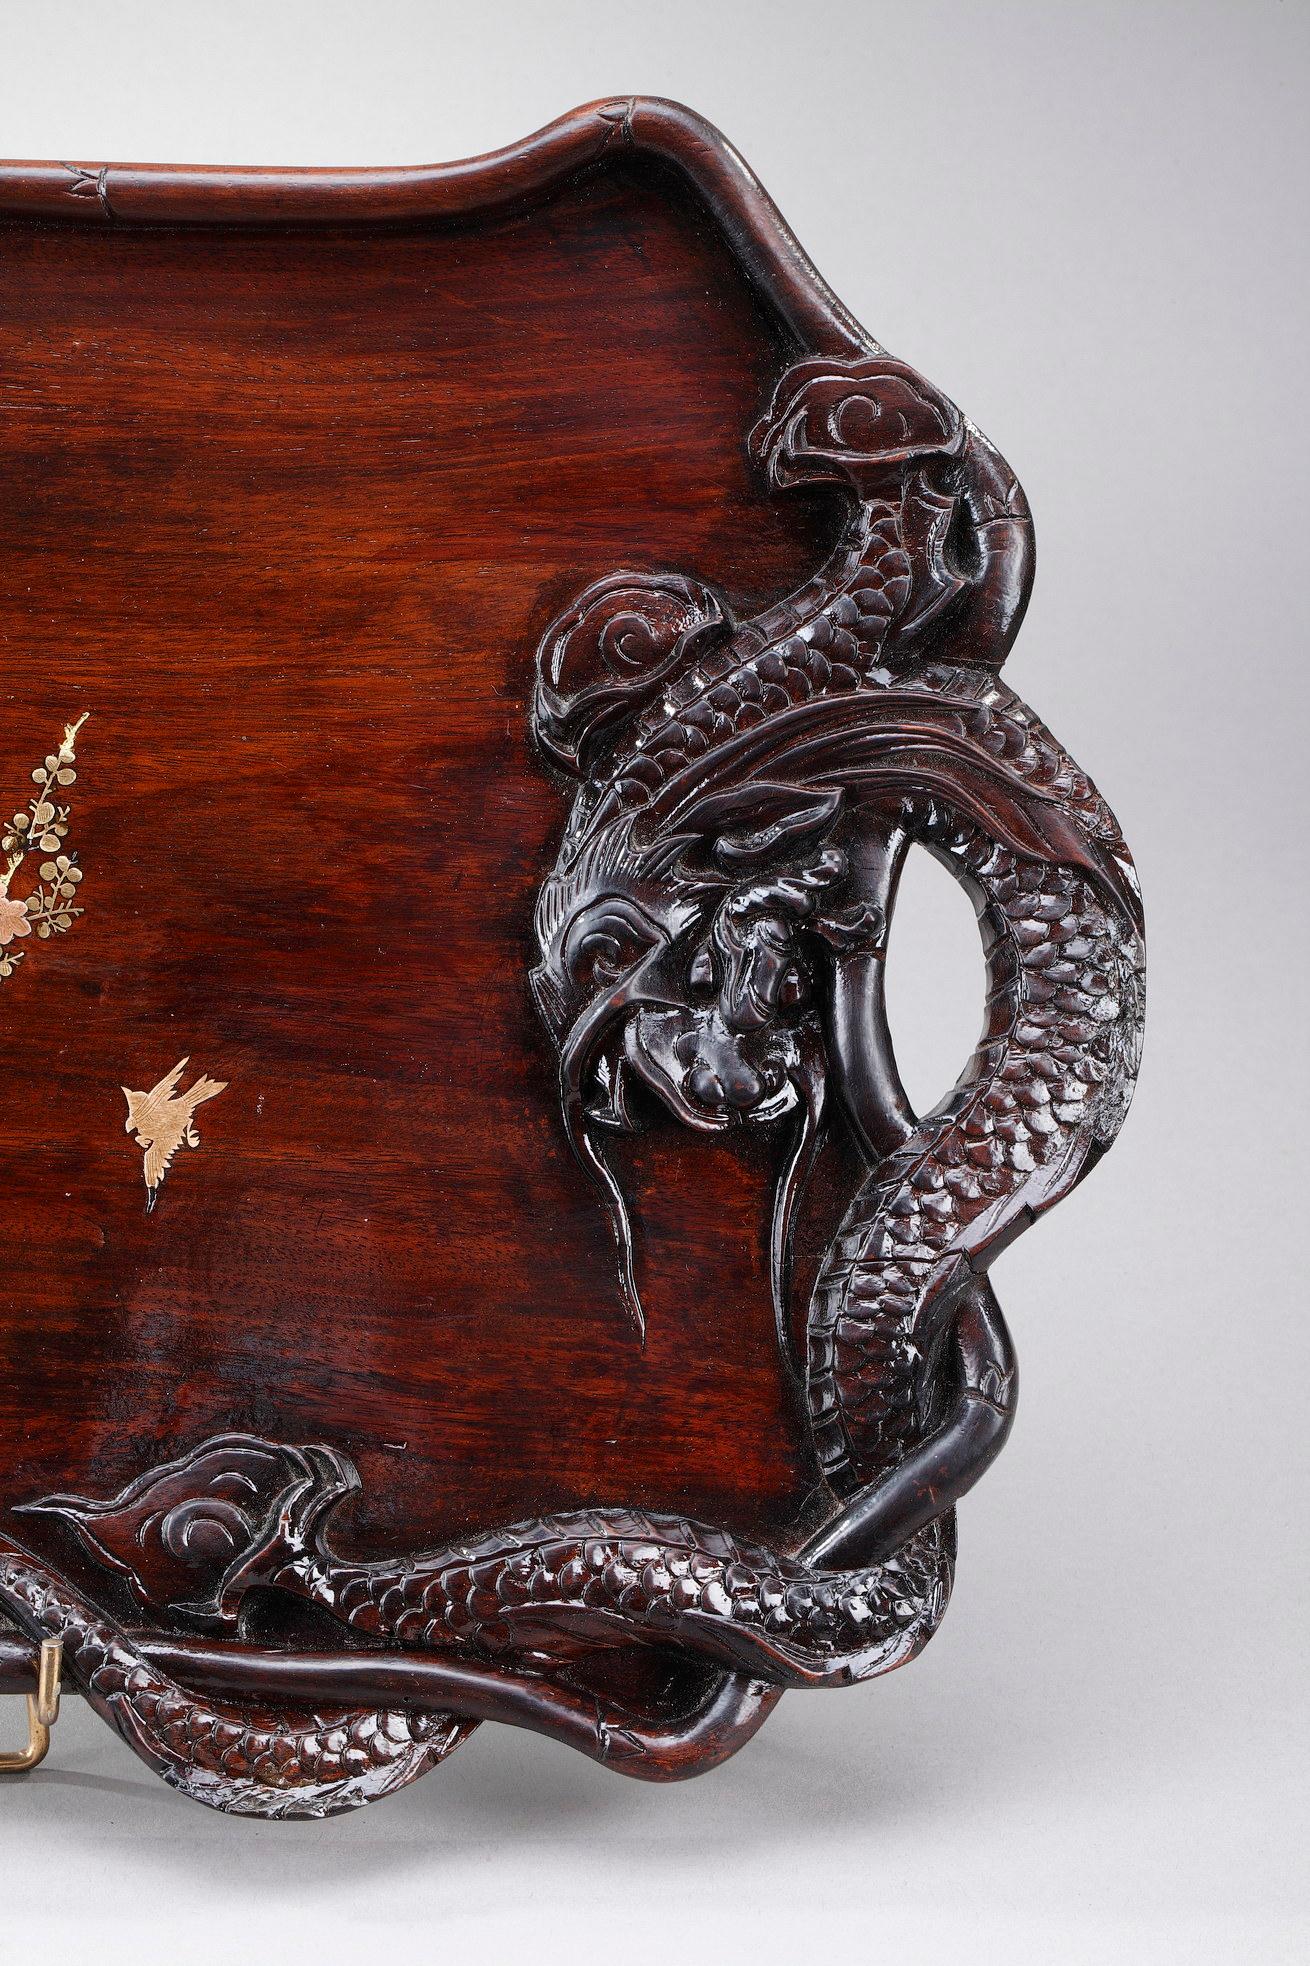 Mid-19th Century Japanese Lacquered Wood Tray in the Taste of Gabriel Viardot